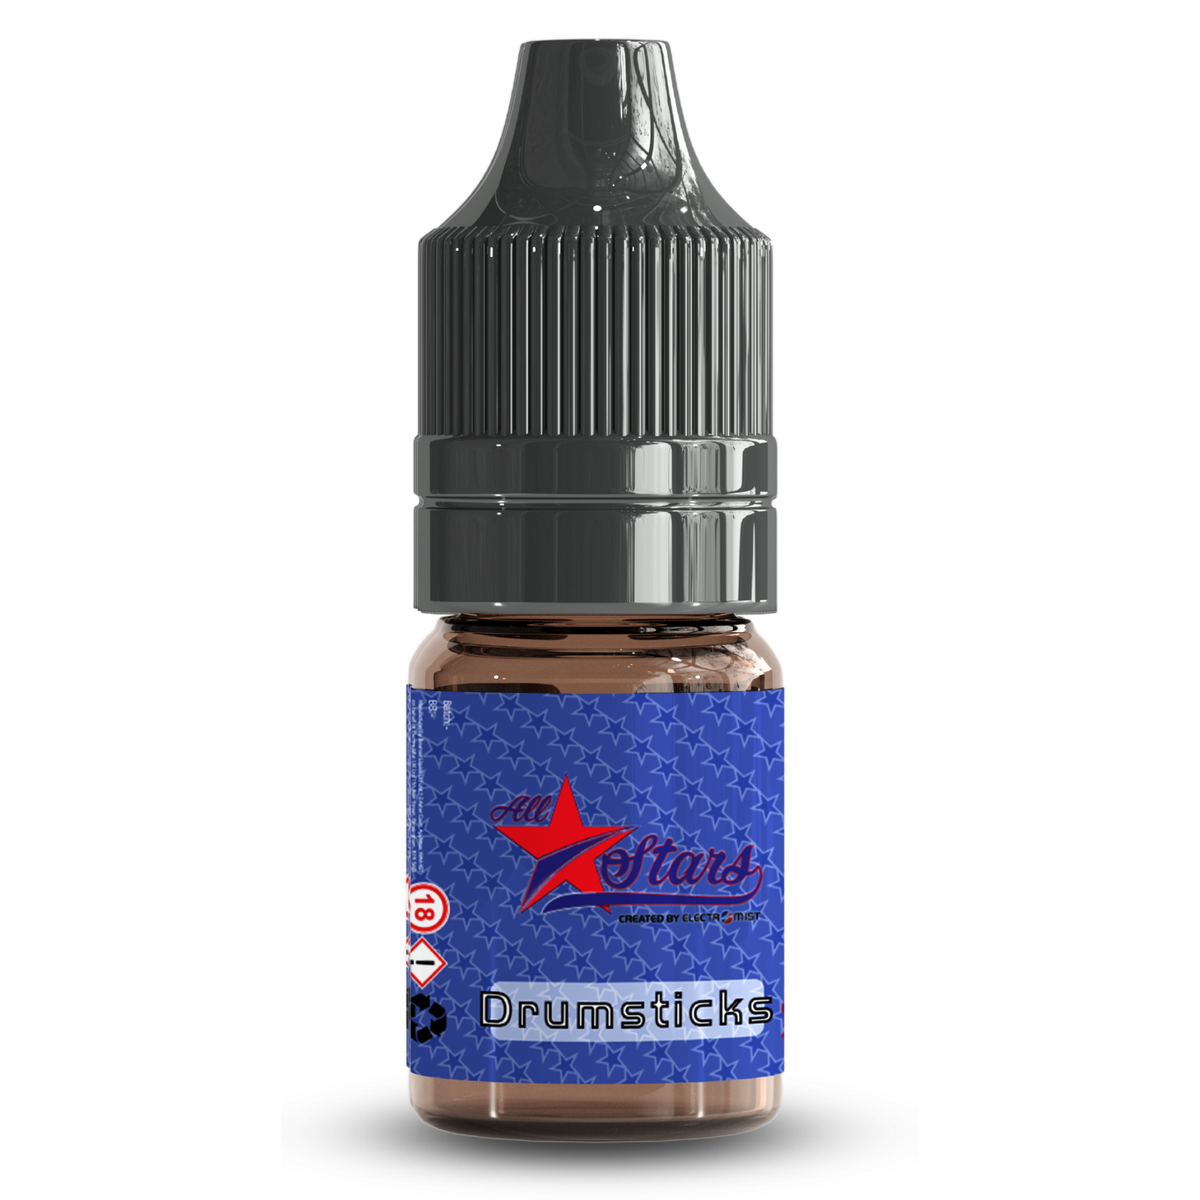 All Stars E-Liquid from the vape brand you can trust, Electromist, . Get your taste buds ready for a flavour sensation, Drumsticks. Nicotine Content: 6mg/12mg/18mg Products may contain nicotine. For over 18s Only ejuice, vape pen, eliquid, e cigarette, 10ml, vaping, cloud, PG, VG, 60/40, vape liquid, Flavour, TPD